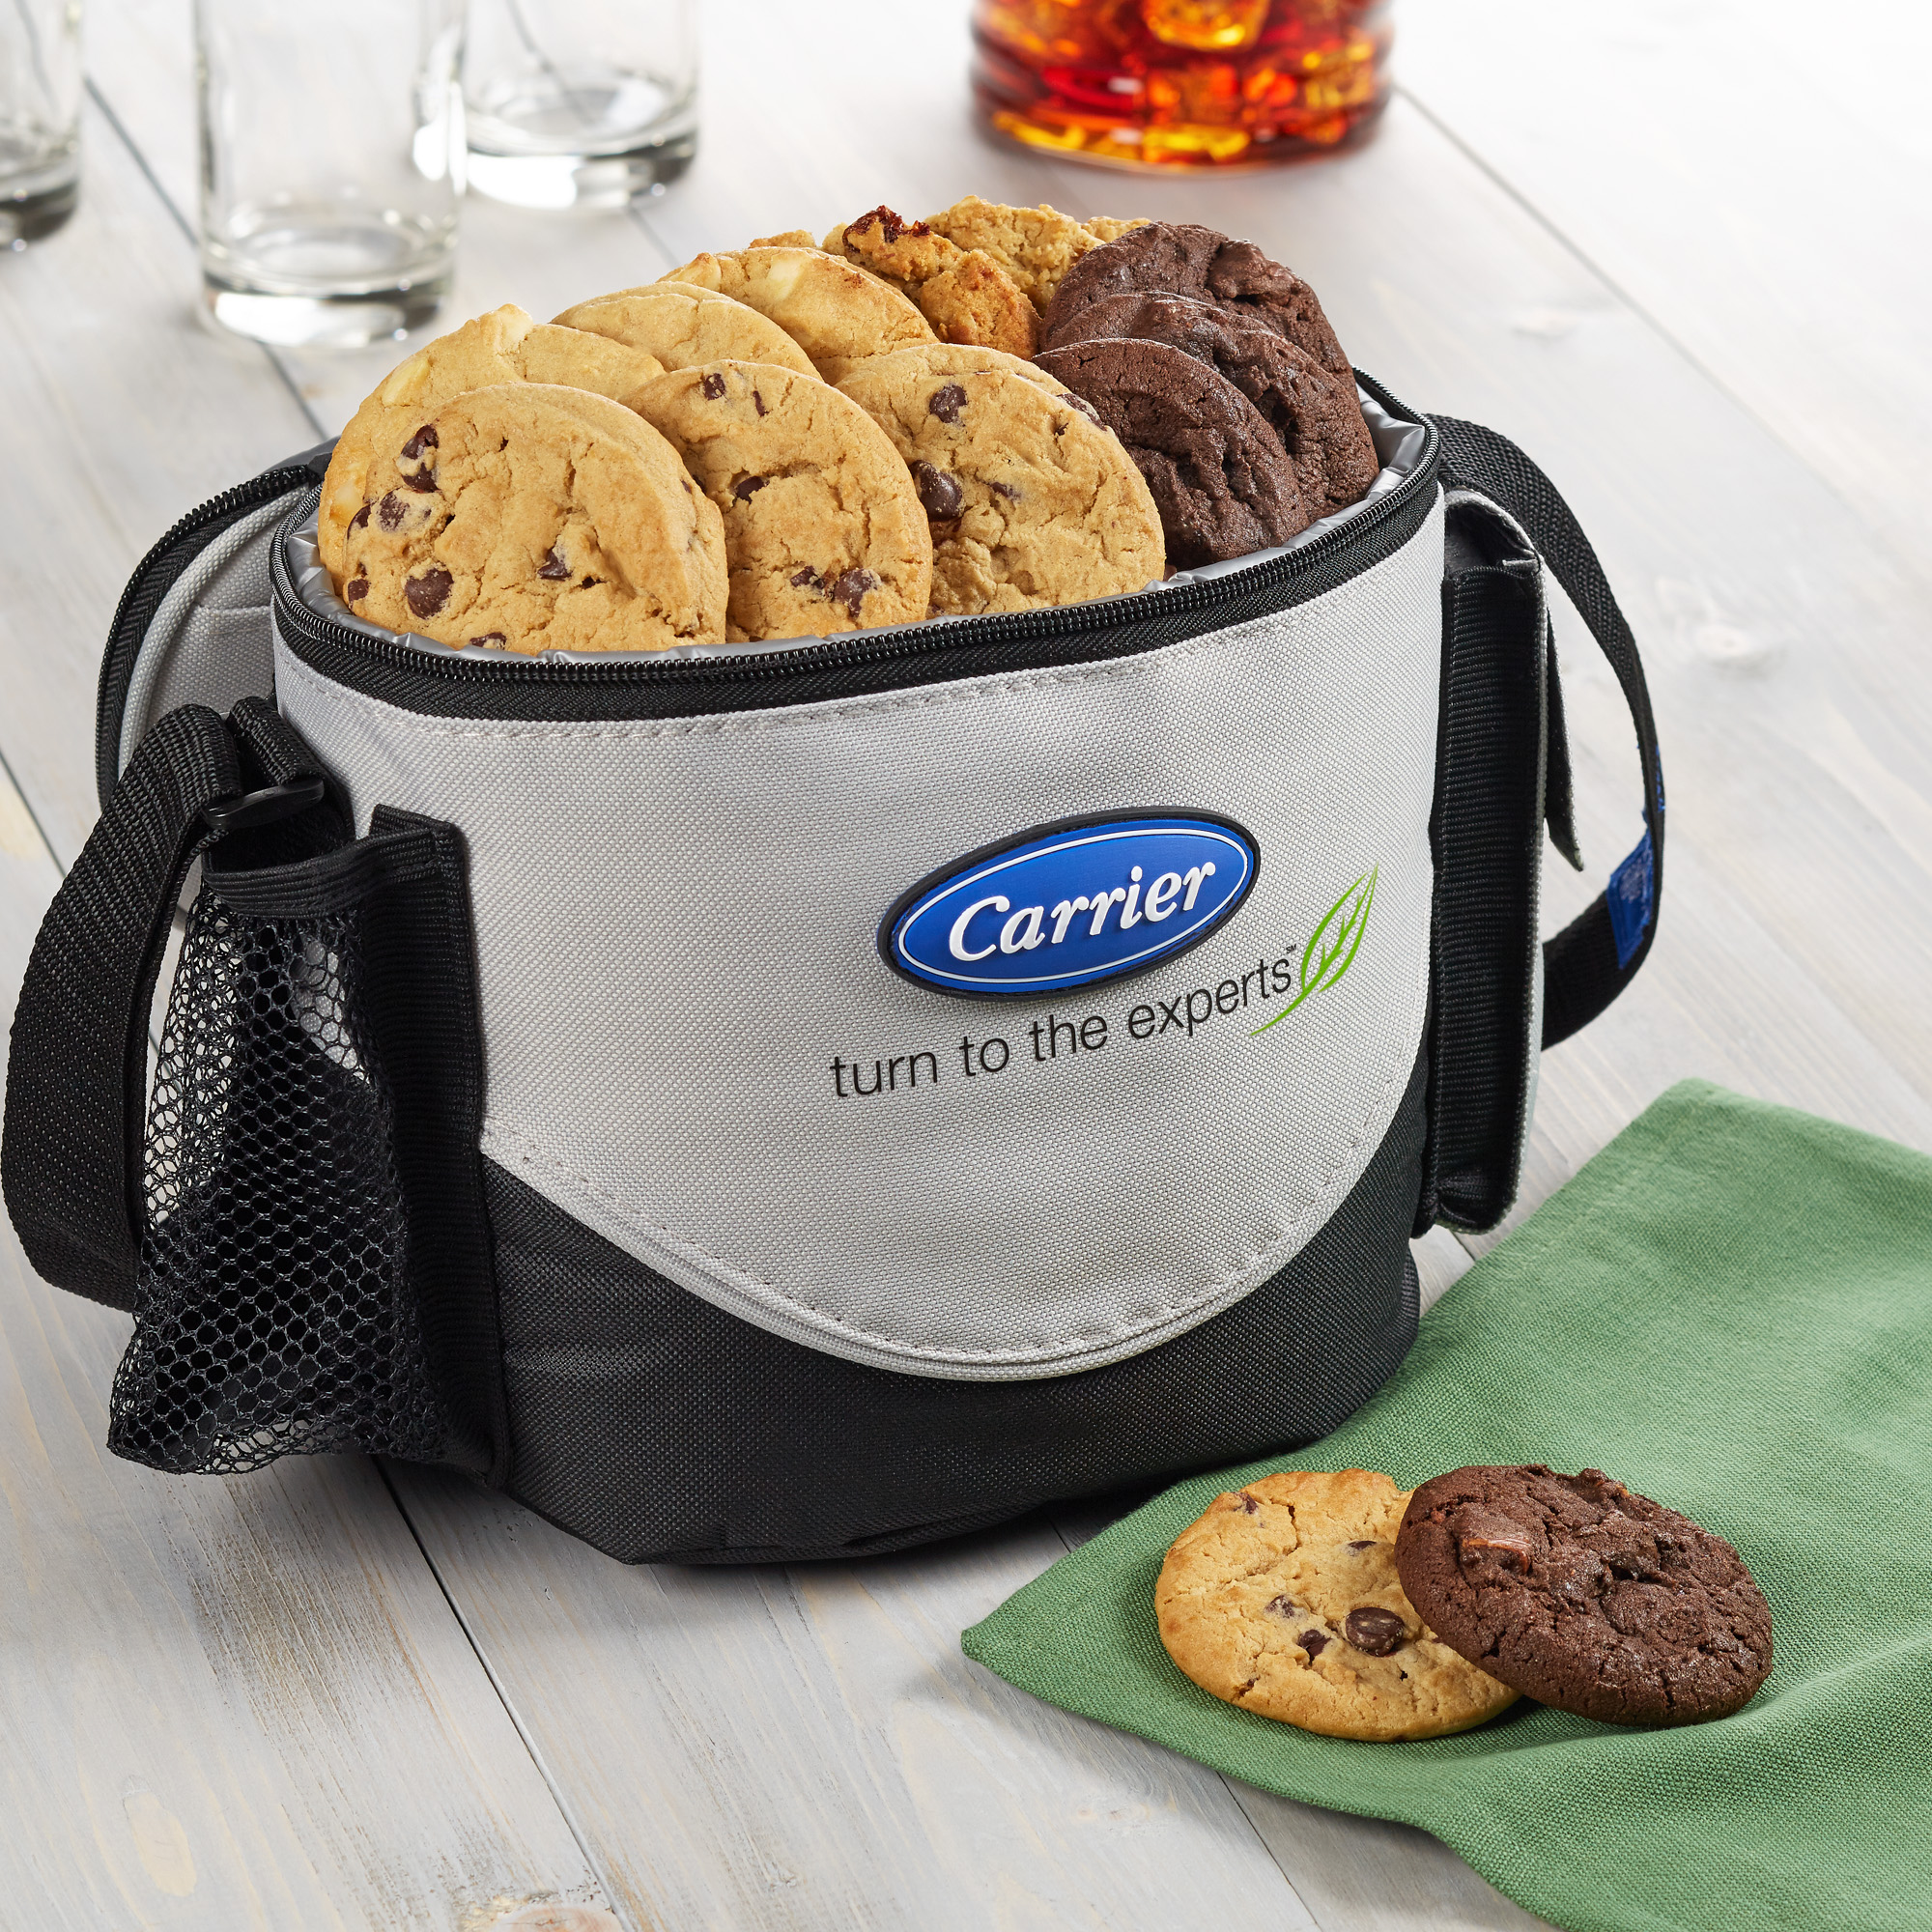 Carrier Cooler with Cookies